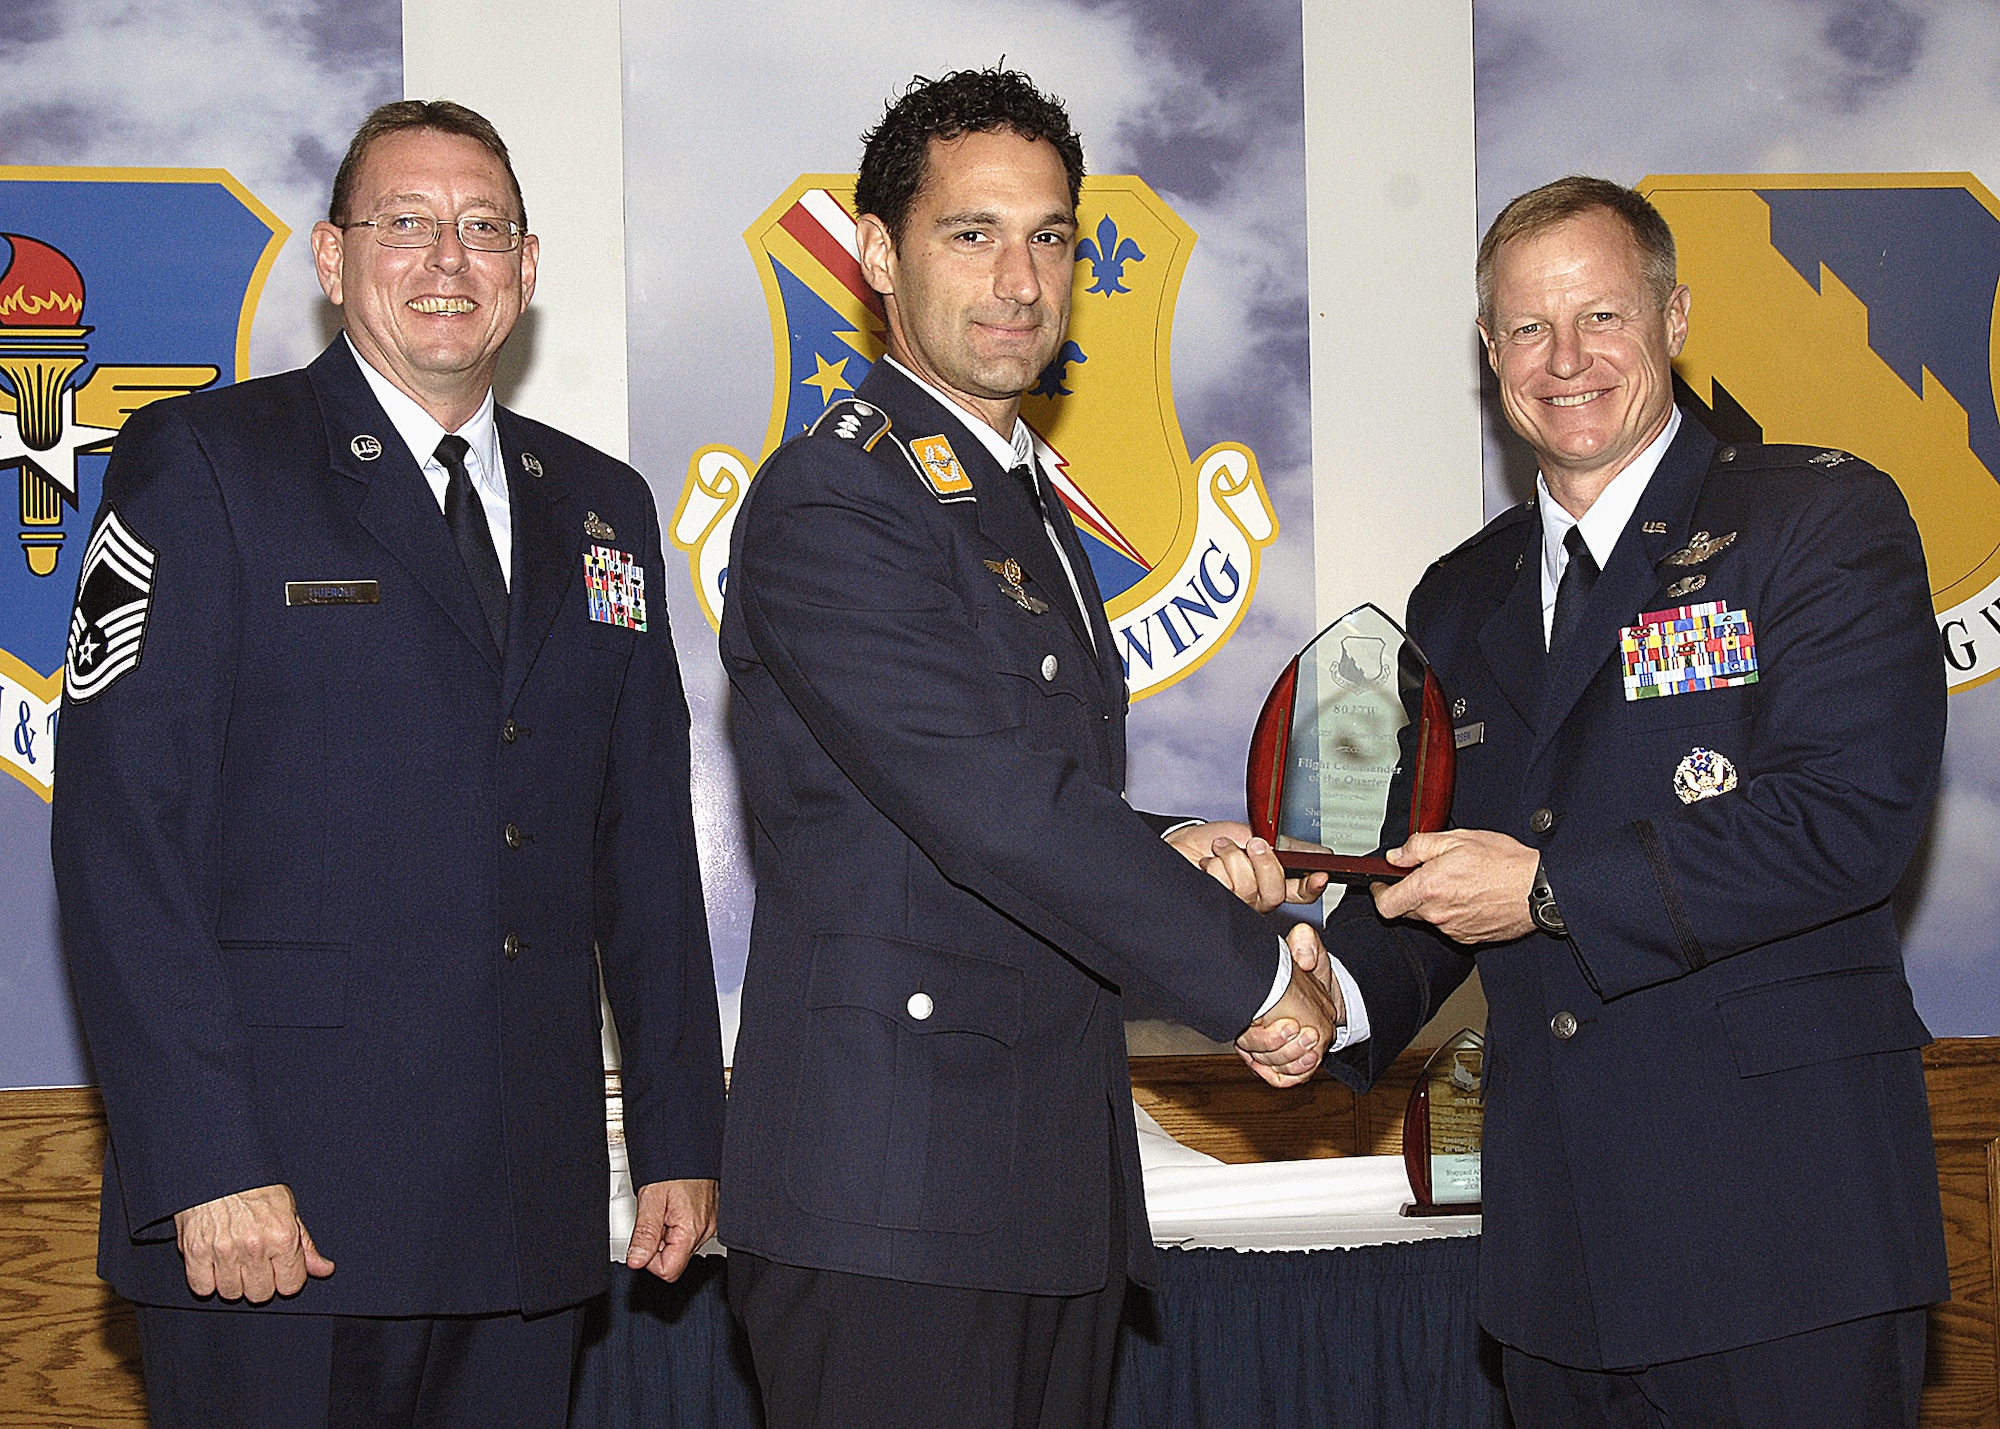 Capt. Michael Renz, 80th Operations Support Squadron, accepts the Flight Commander of the Quarter award from 80th Flying Training Wing Commander Col. David Petersen April 22 during the wing's quarterly award ceremony. Captain Renz was recognized for revamping the wing's motorcycle safety program, as well as keeping senior national representatives aware of military training responsibilities. The captain also displayed leadership by scheduling additional training missions to ensure a student pilot successfully completed the program. Also pictured is 80th FTW Superintendent Chief Master Sgt. Norman Theirolf. (U.S. Air Force photos/Harry Tonemah)